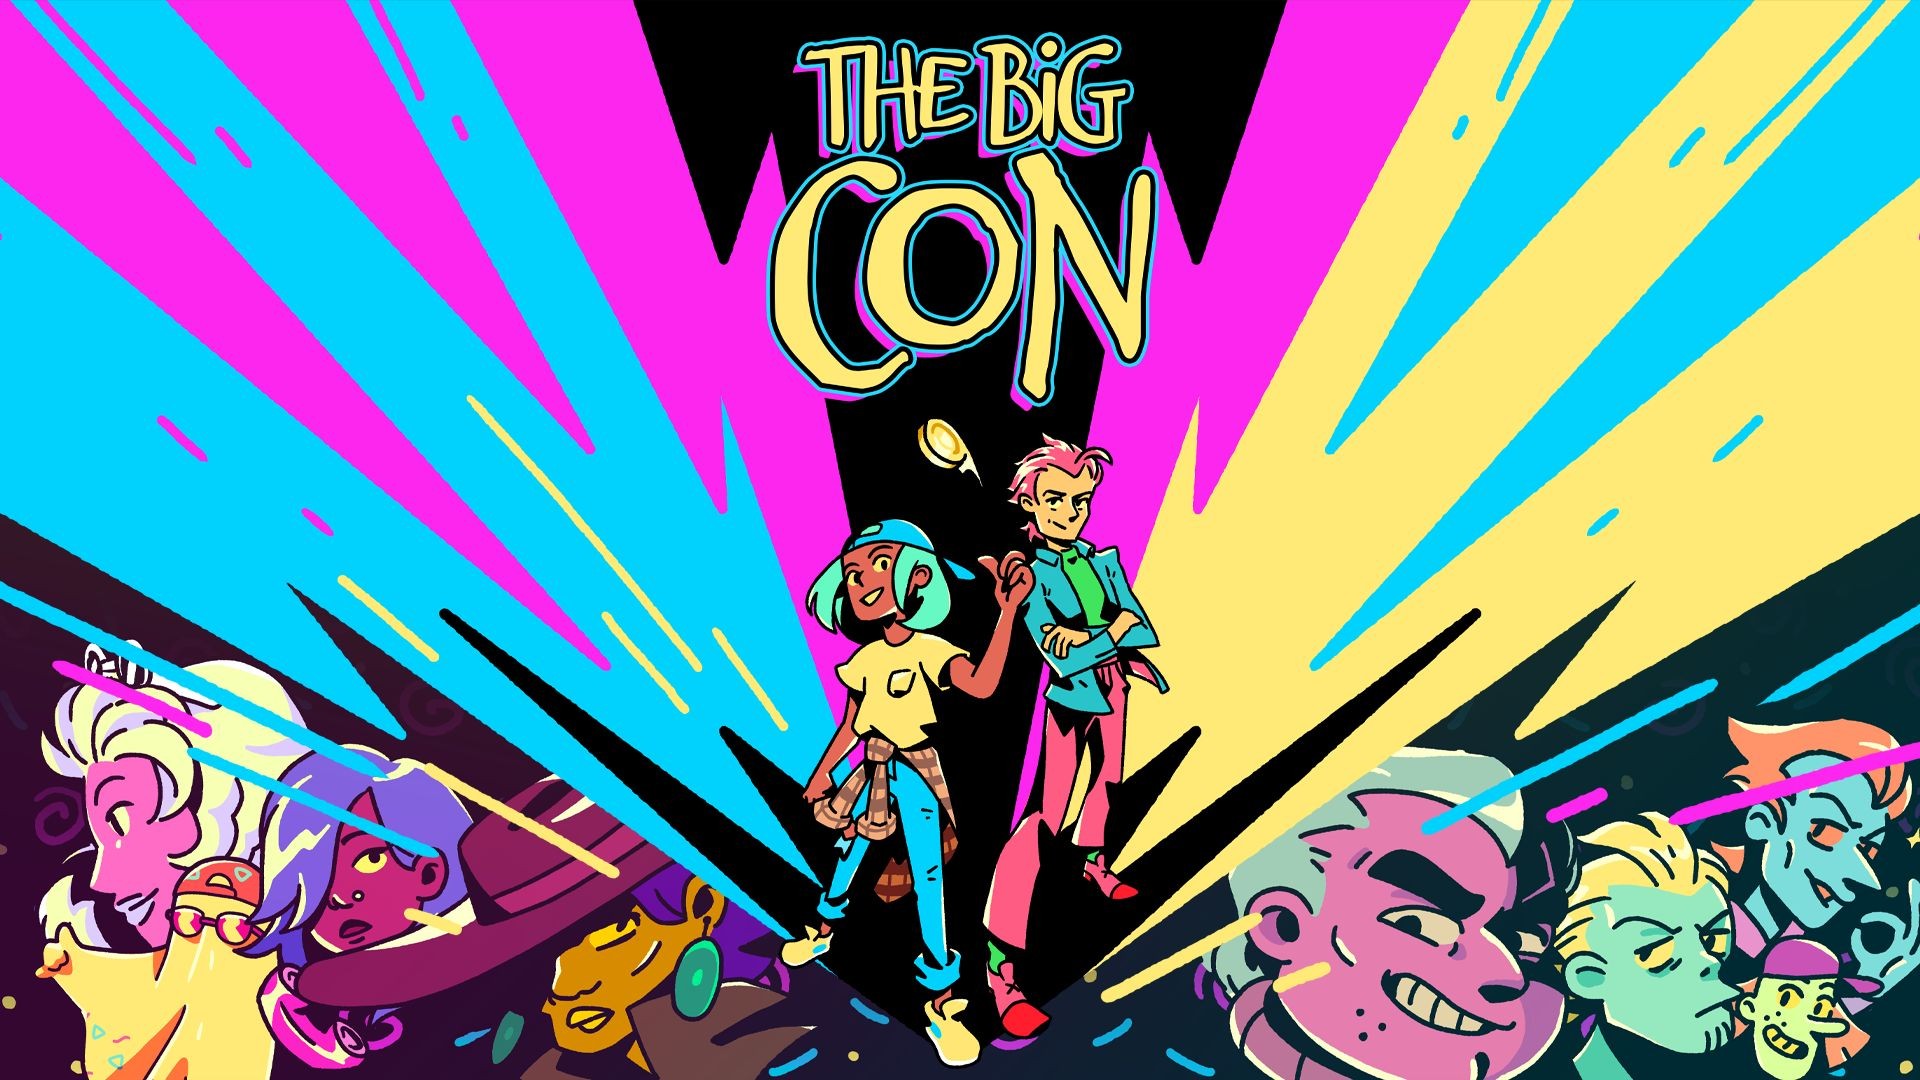 Video For Getting Nostalgic About Developing the ‘90s-themed The Big Con